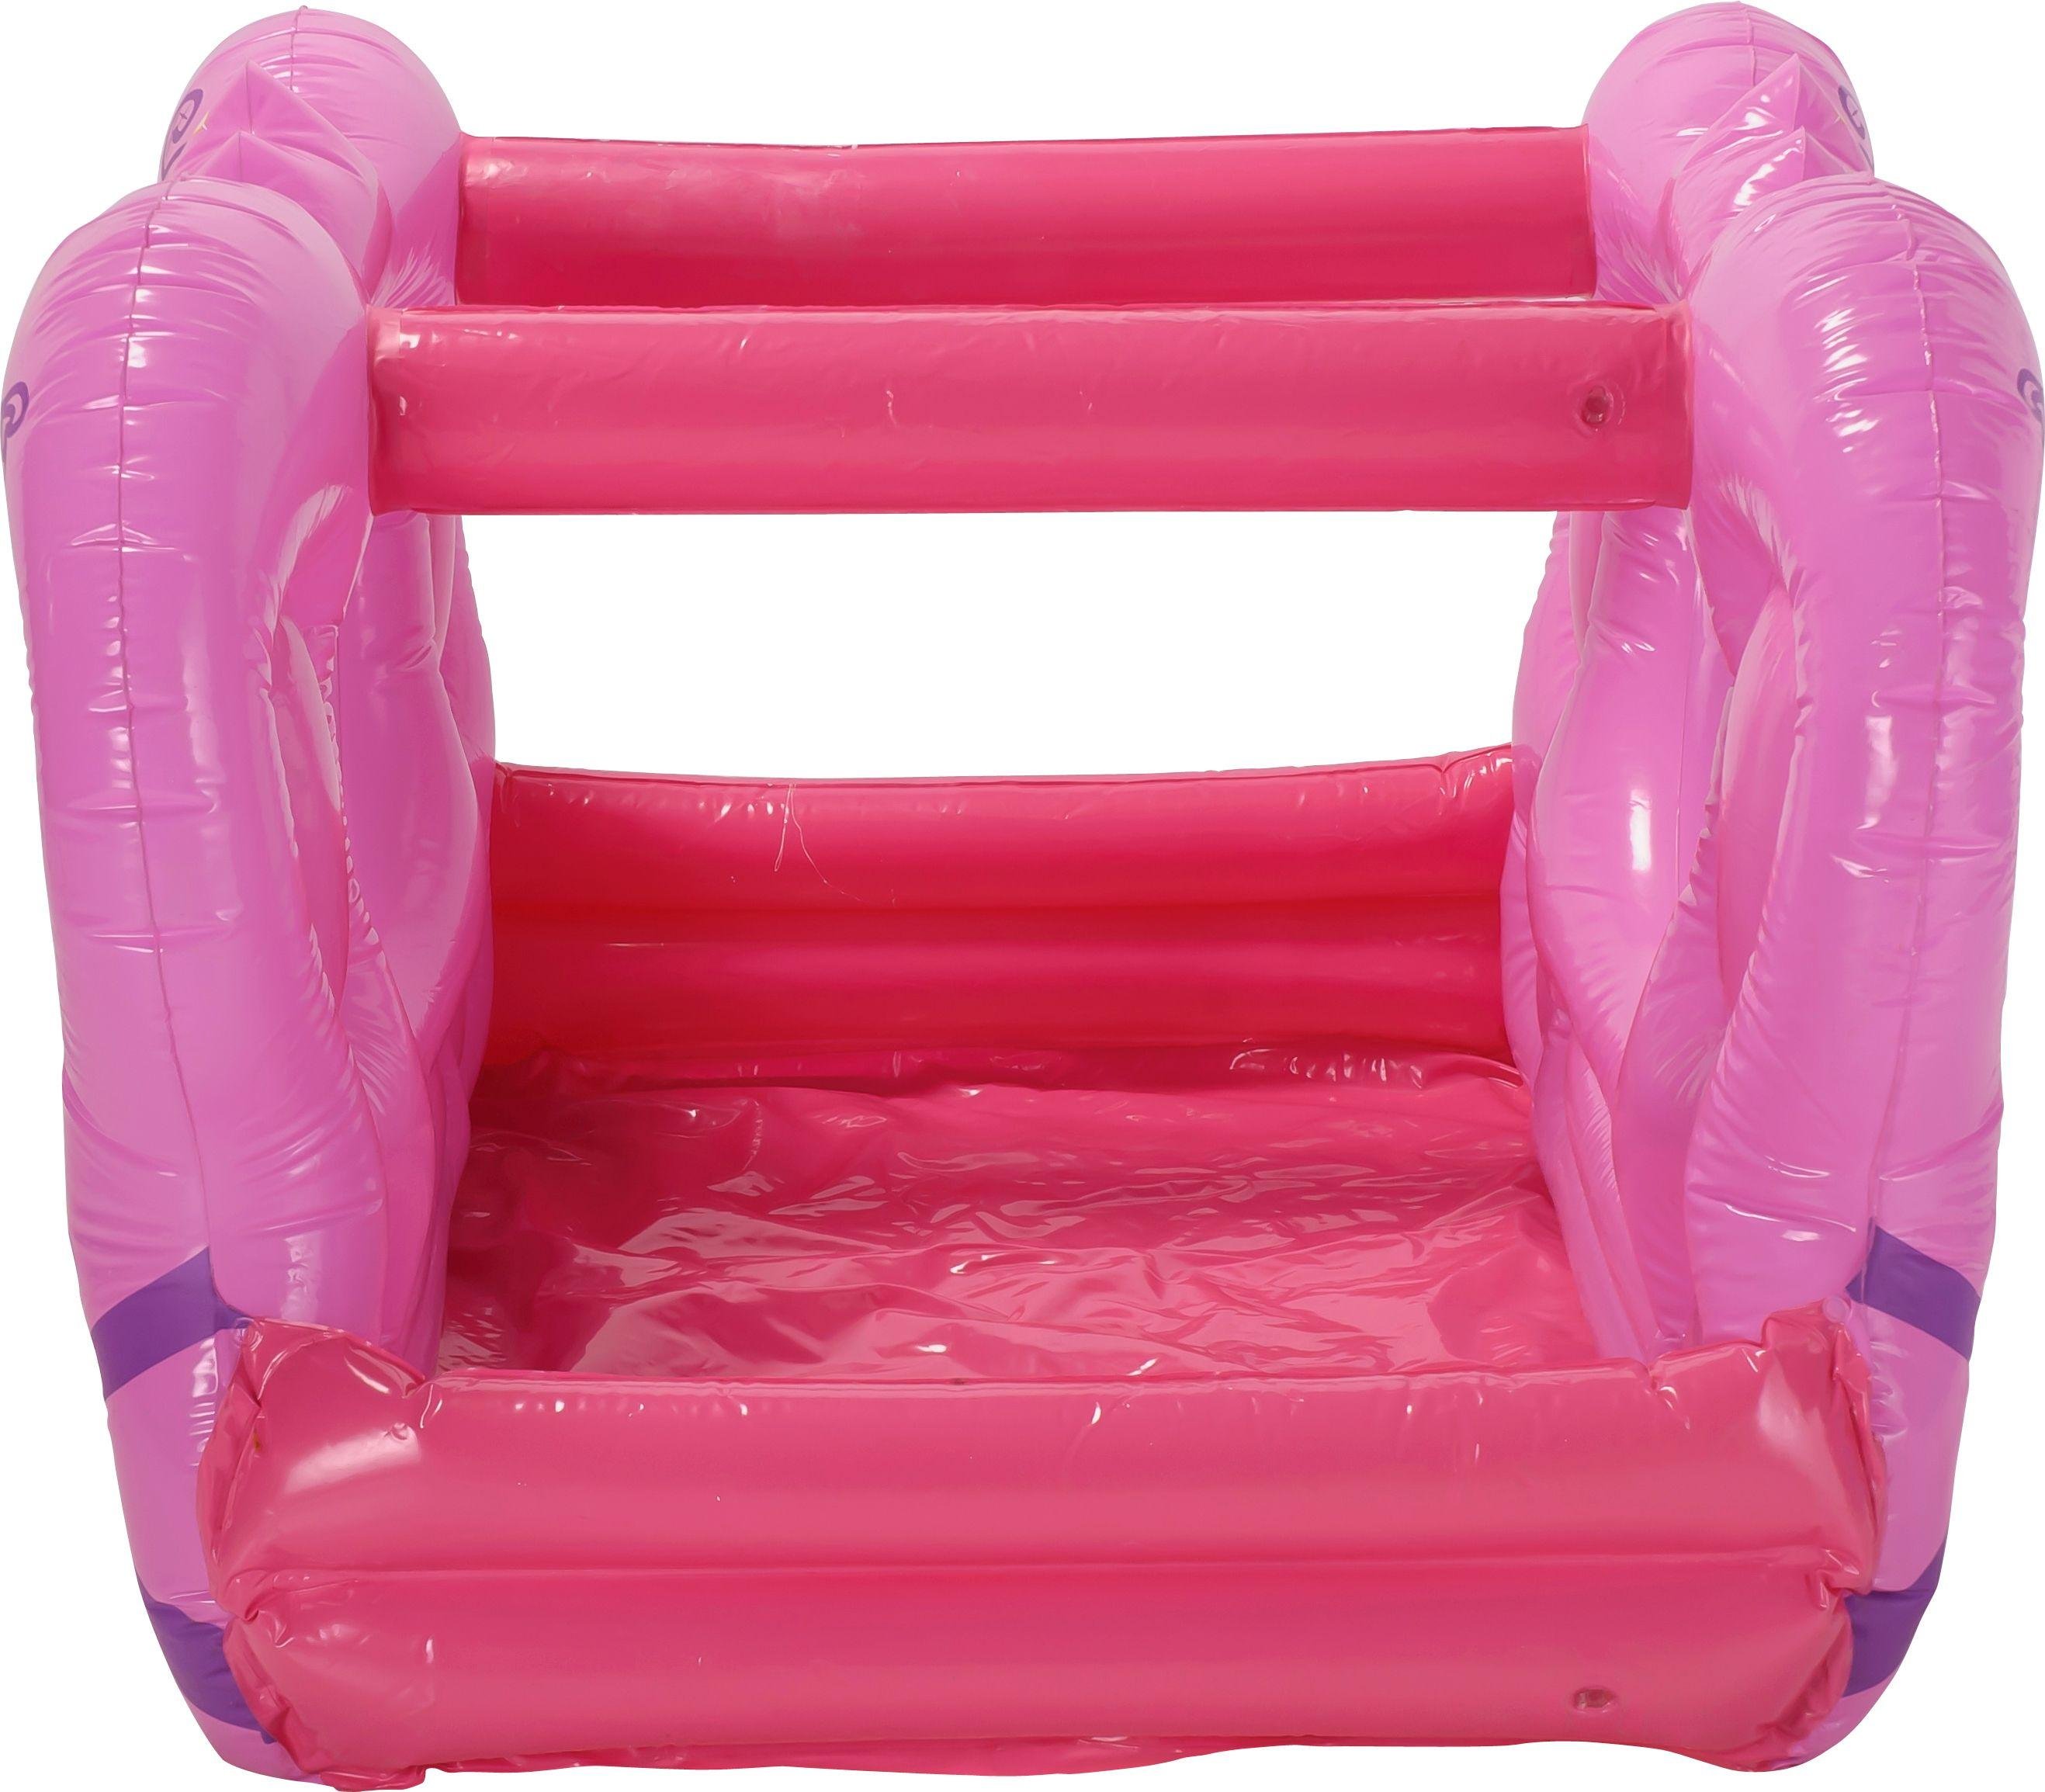 Chad Valley 4.5ft Princess Carriage Ball Pit and Pool Review